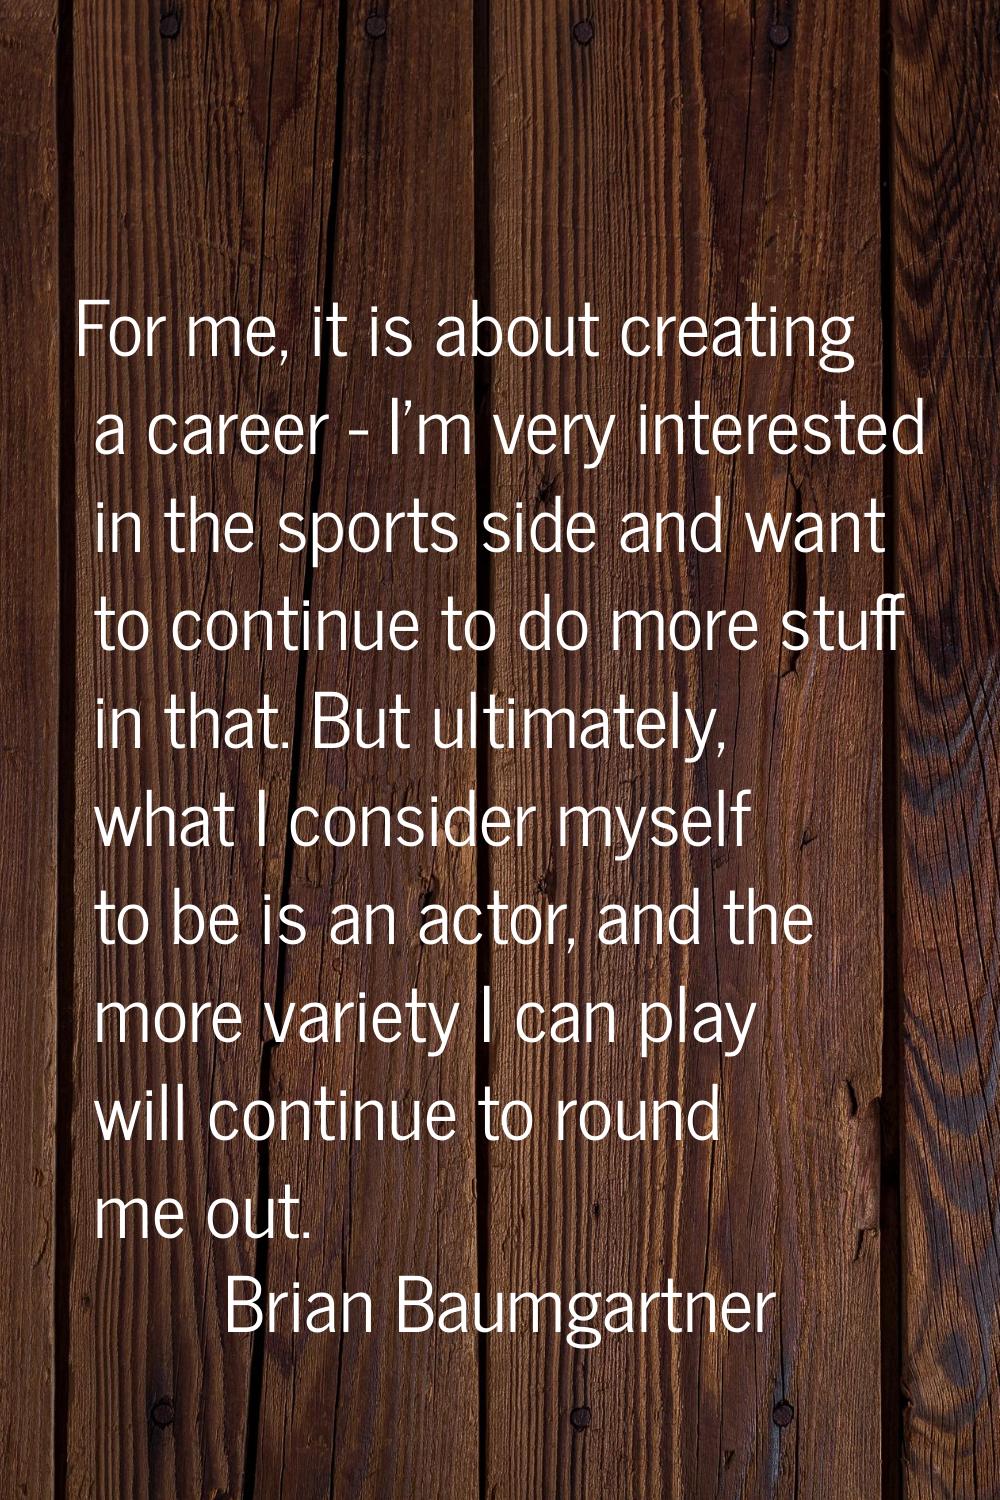 For me, it is about creating a career - I'm very interested in the sports side and want to continue